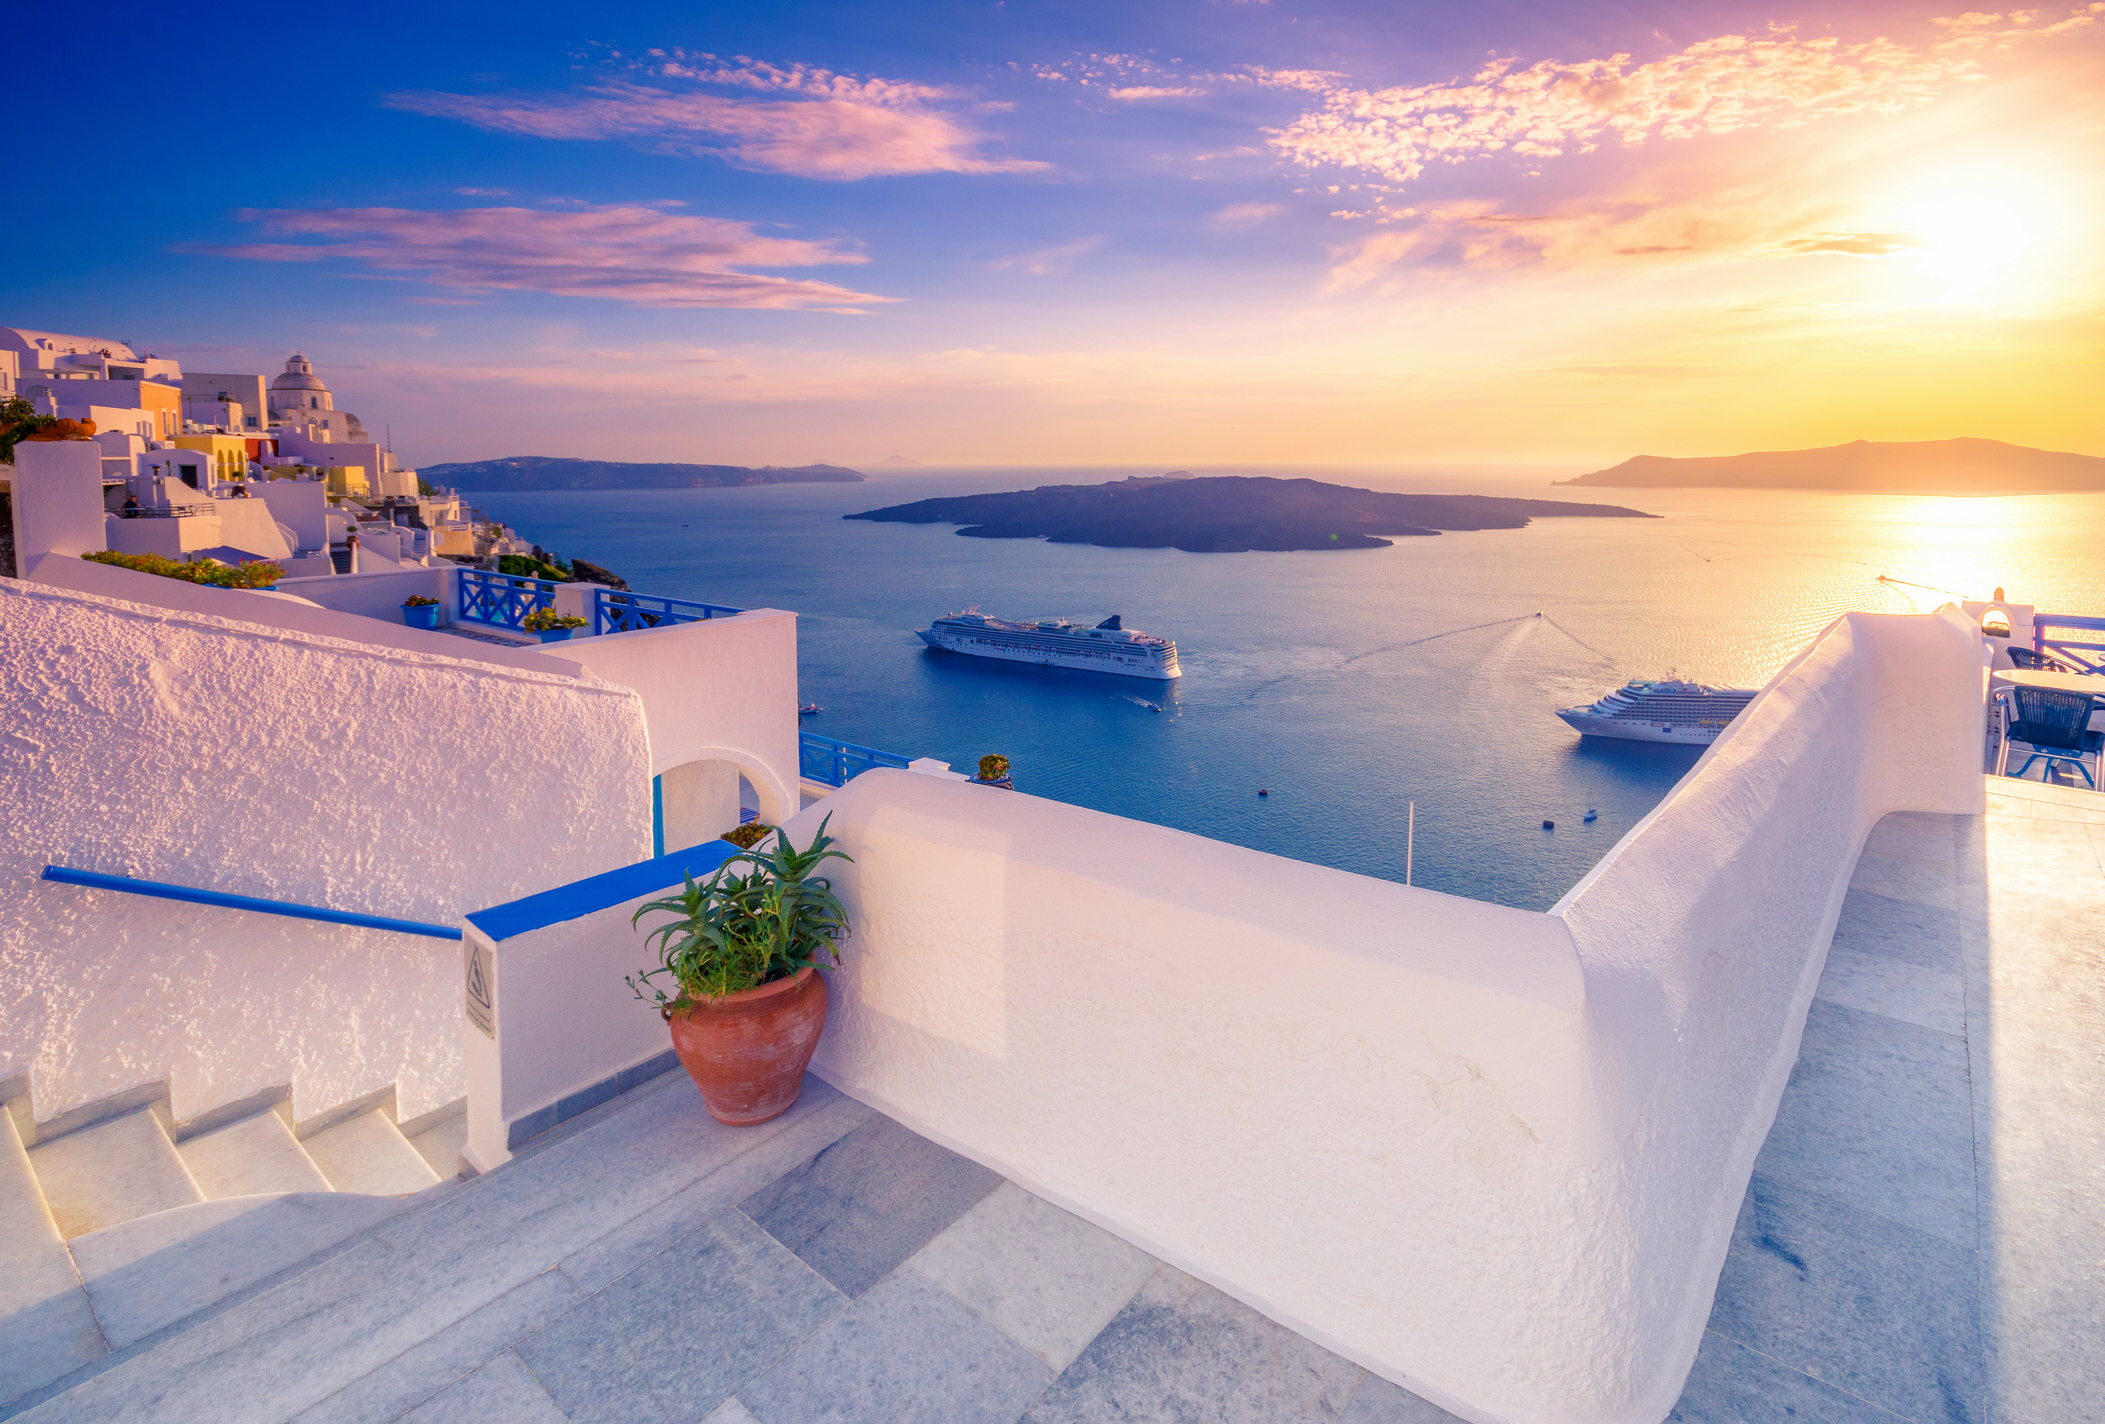 7-day springtime Mediterranean cruise from Athens from $839